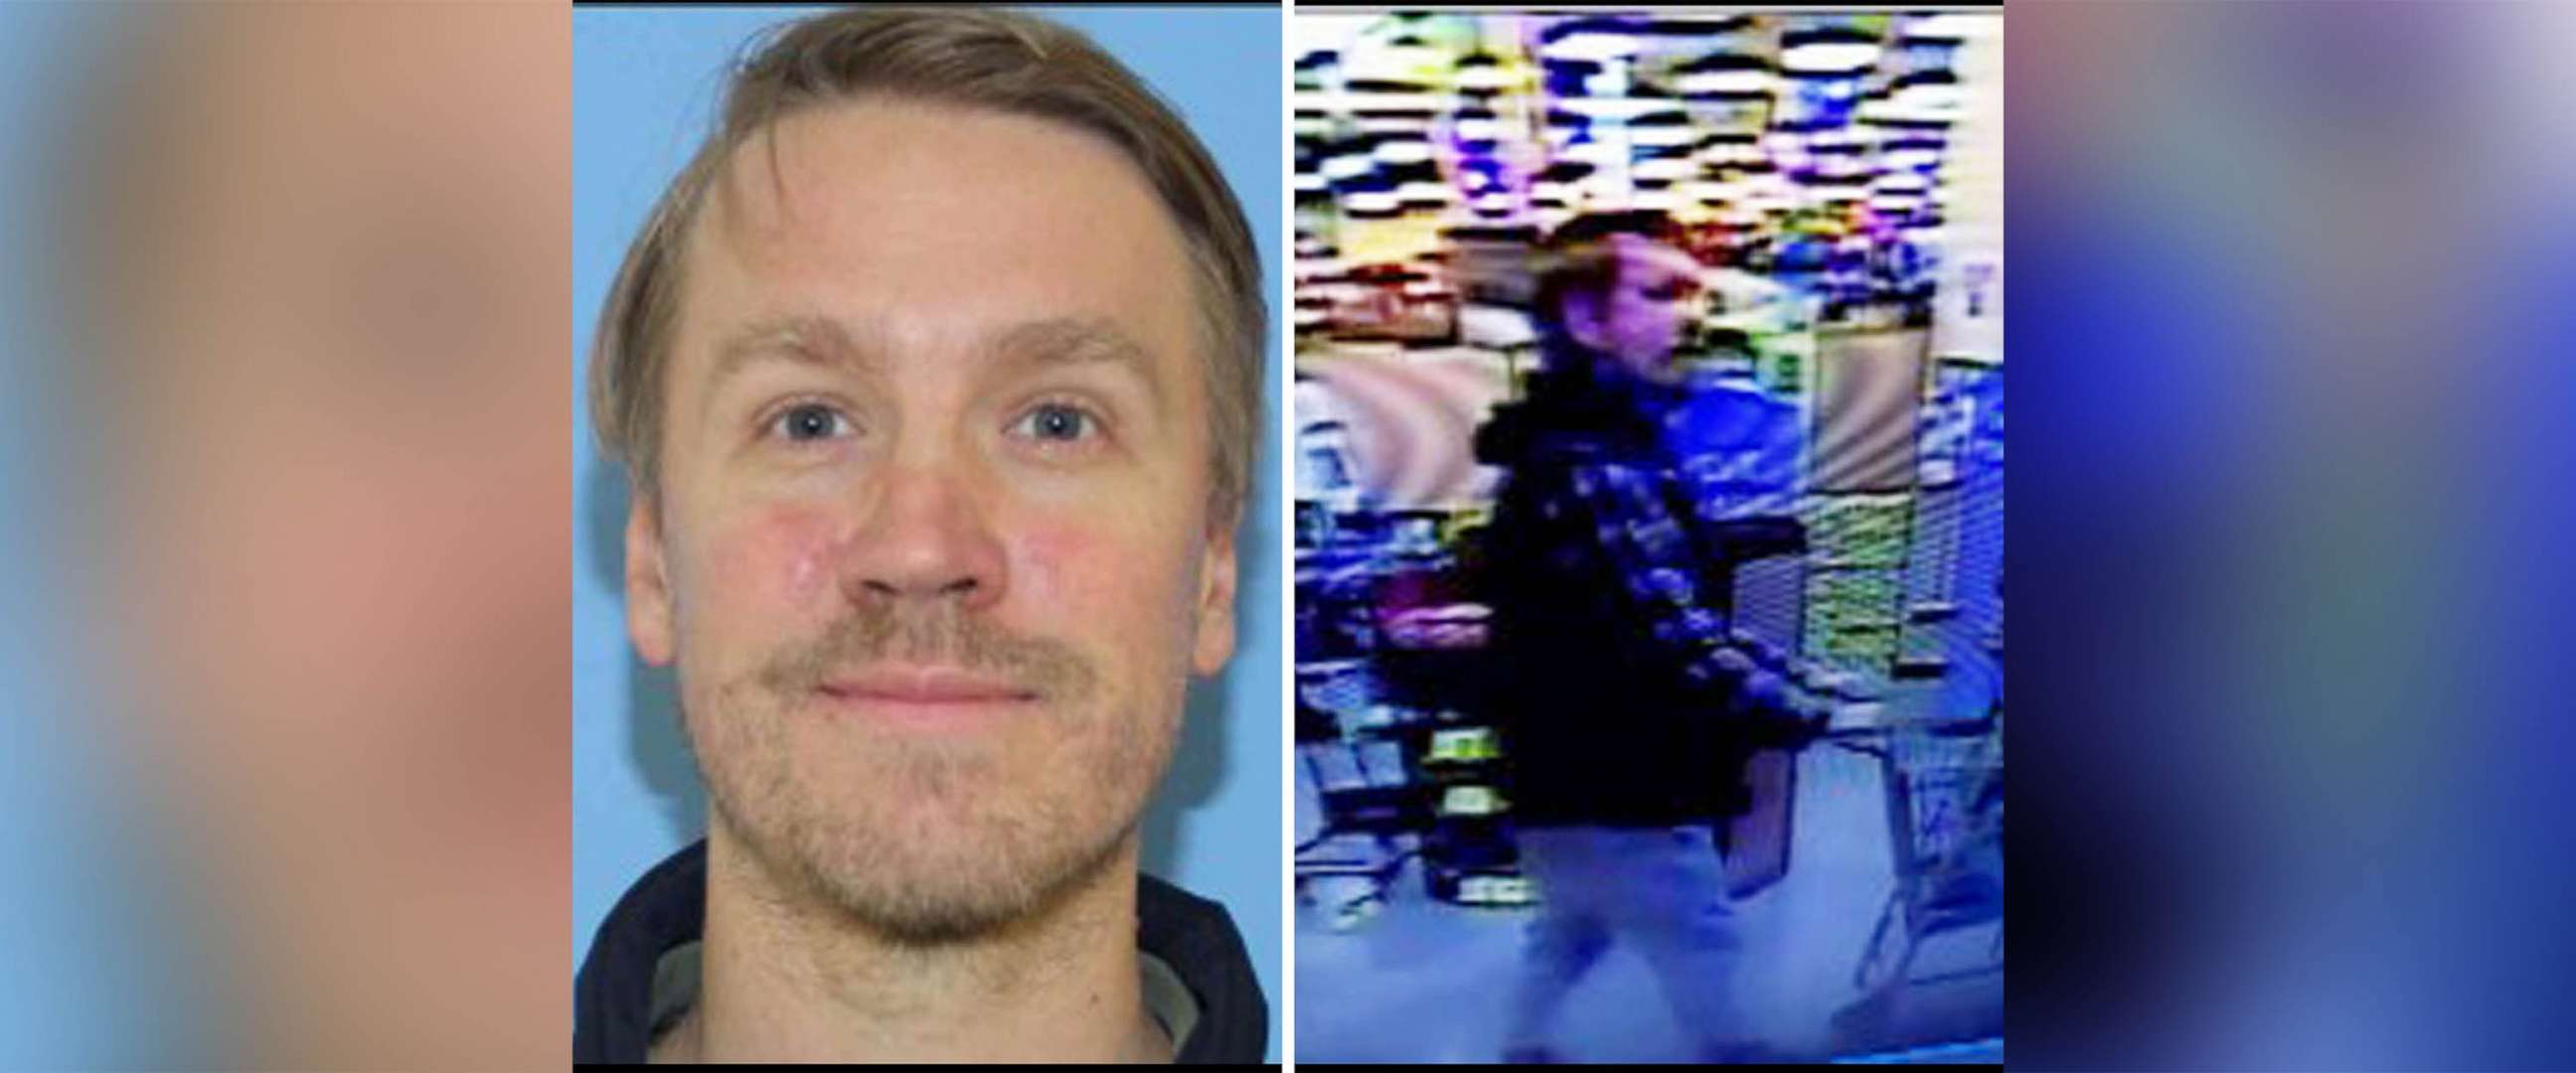 PHOTO: Aaron Christopher Kelly, a person being sought in connection with the shootings at the Fred Meyer grocery store in Richland, Wash. on Feb. 7, is seen in images released by the Richland Police Department on Feb. 8, 2022.